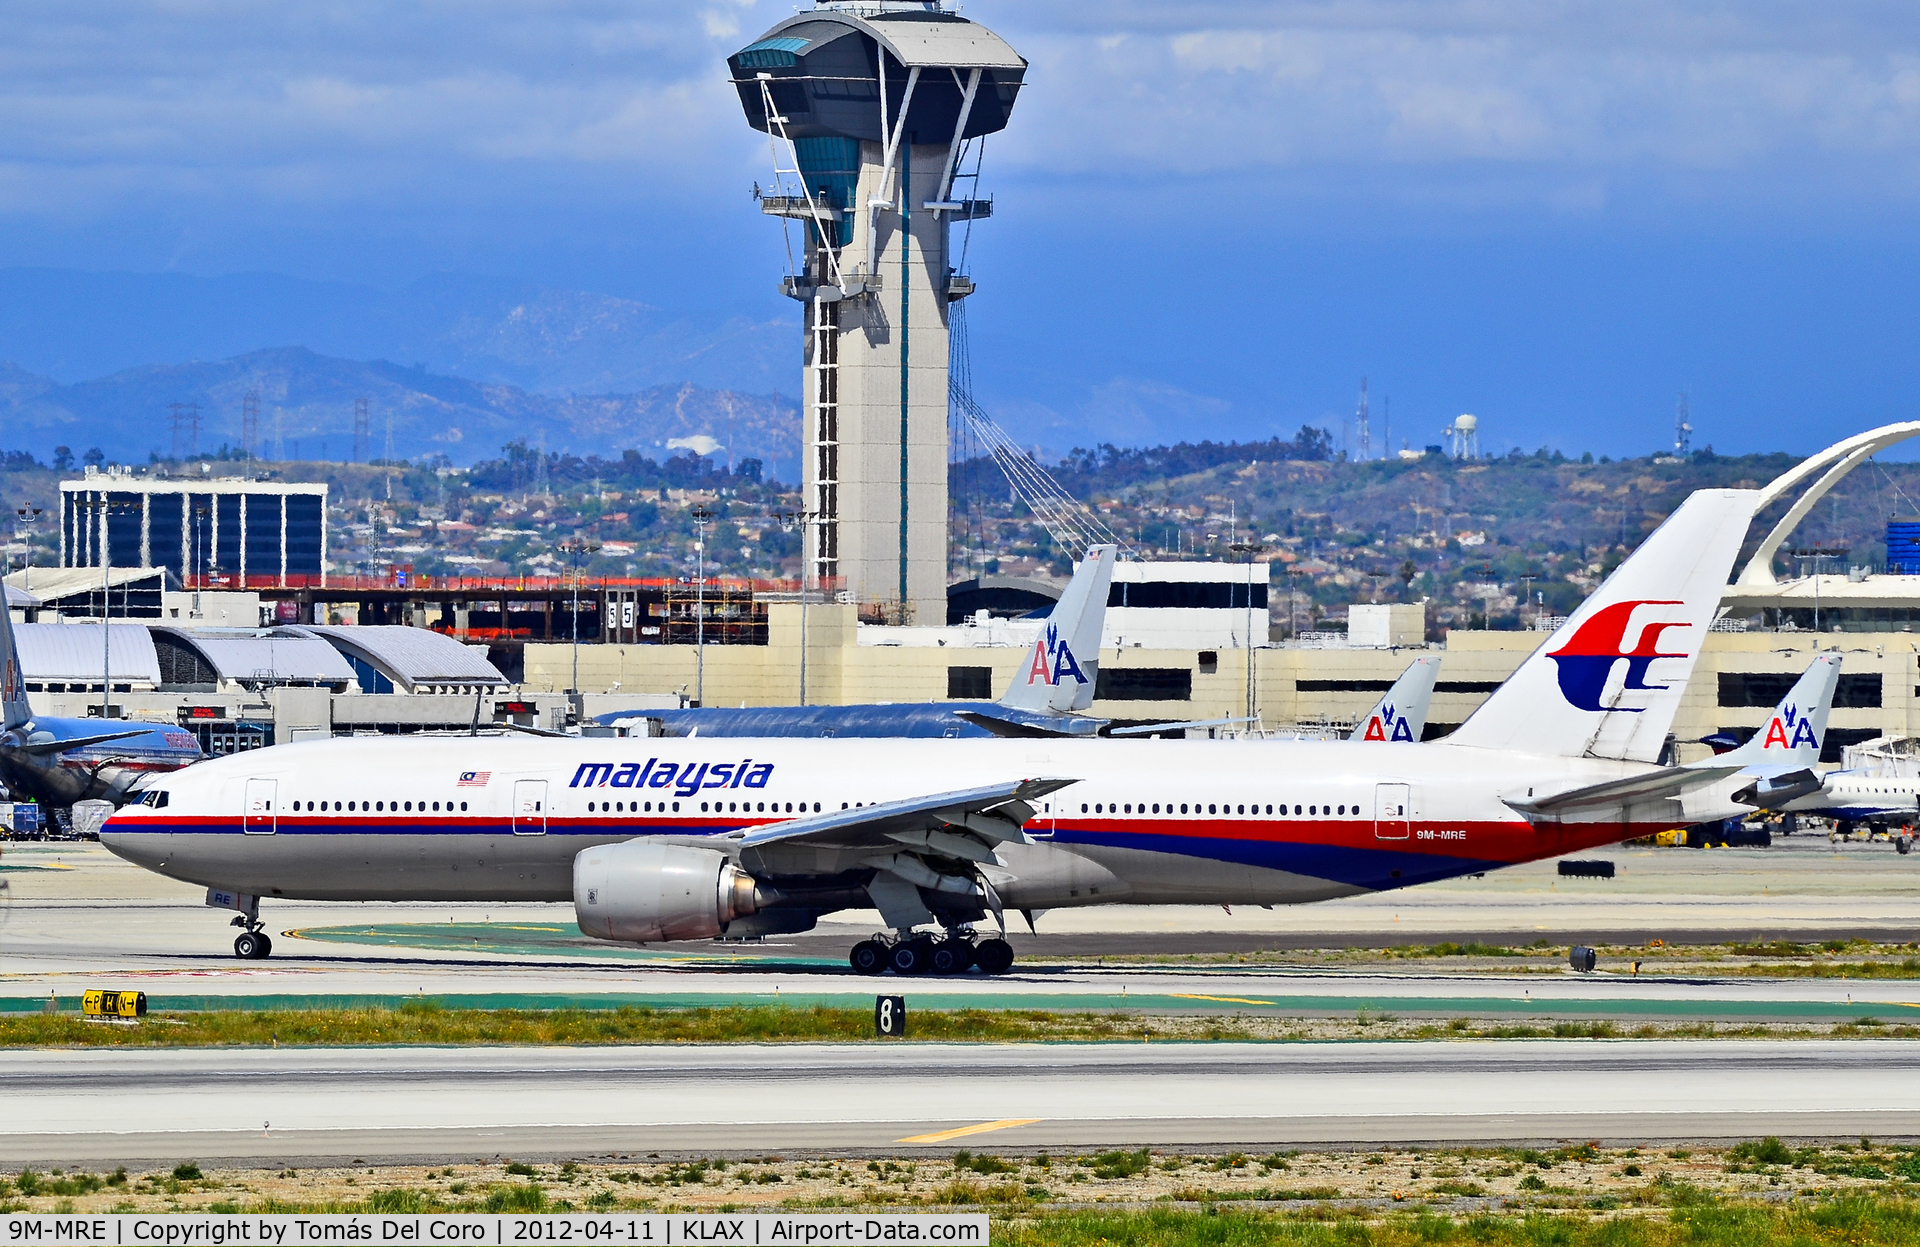 9M-MRE, 1997 Boeing 777-2H6/ER C/N 28412, 9M-MRE Malaysia Airlines Boeing 777-2H6/ER (cn 28412/115)

Los Angeles International Airport (IATA: LAX, ICAO: KLAX, FAA LID: LAX)
TDelCoro
April 11, 2012